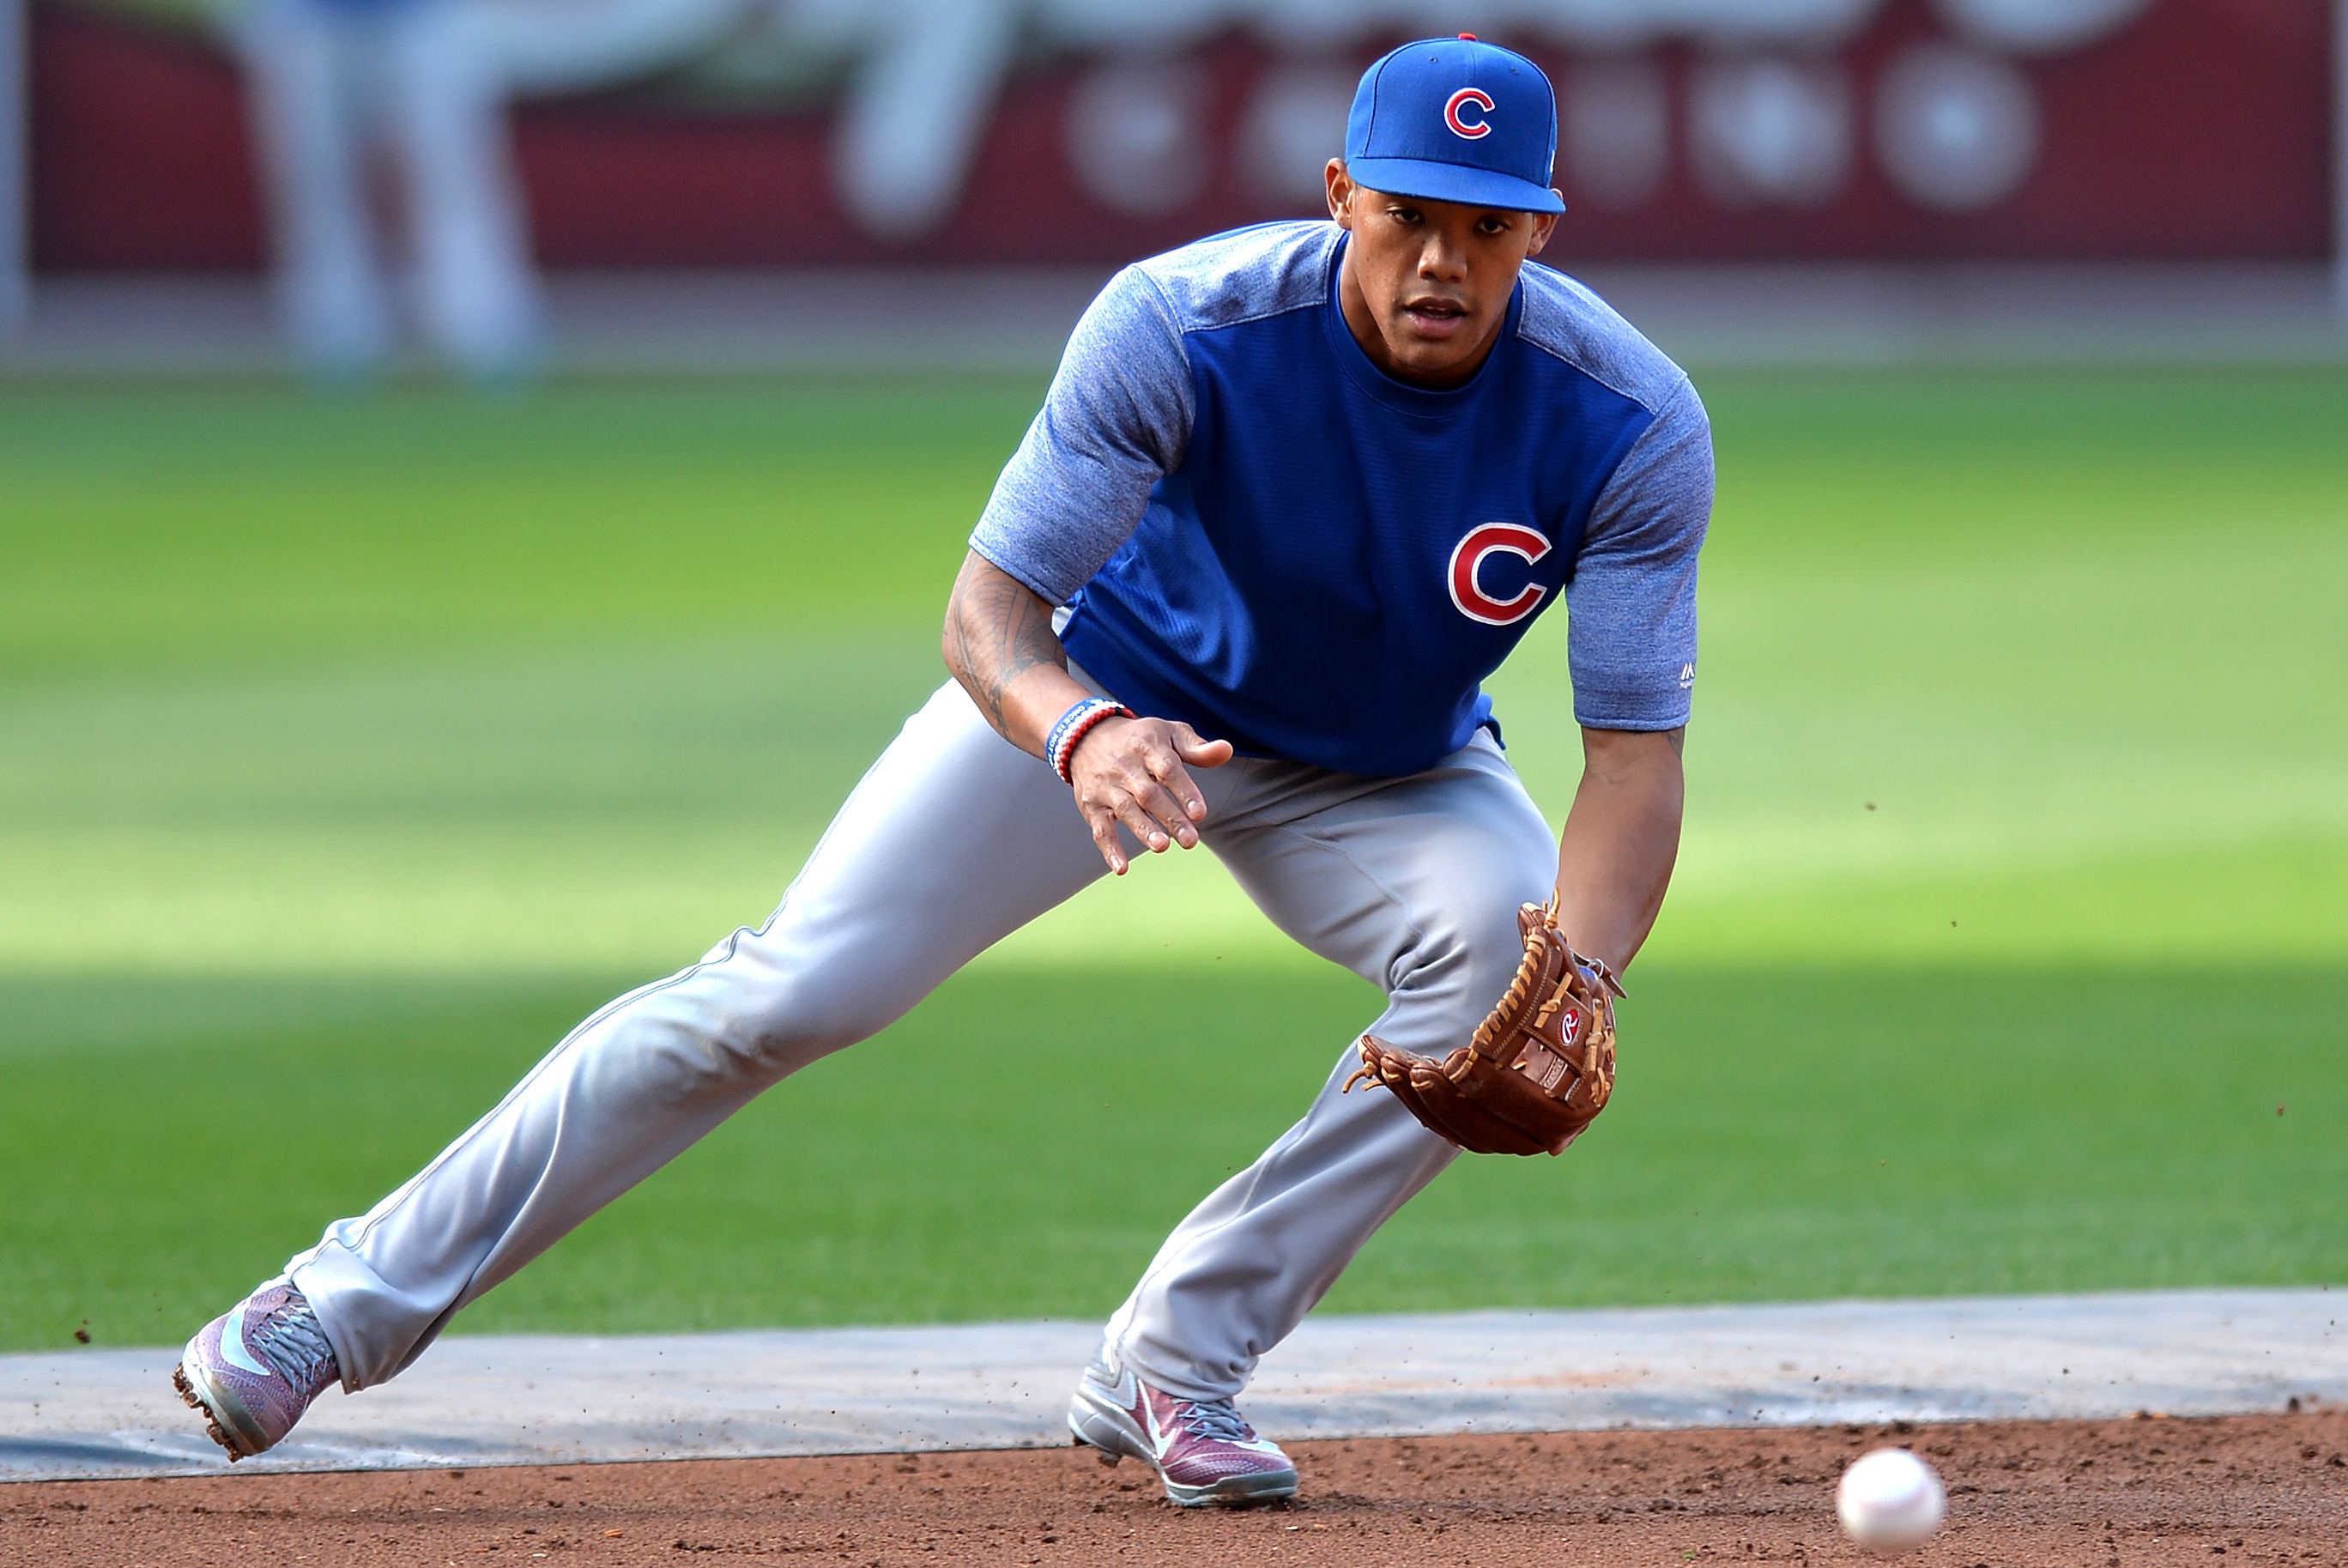 ADDISON RUSSELL CAREER HIGHLIGHTS 